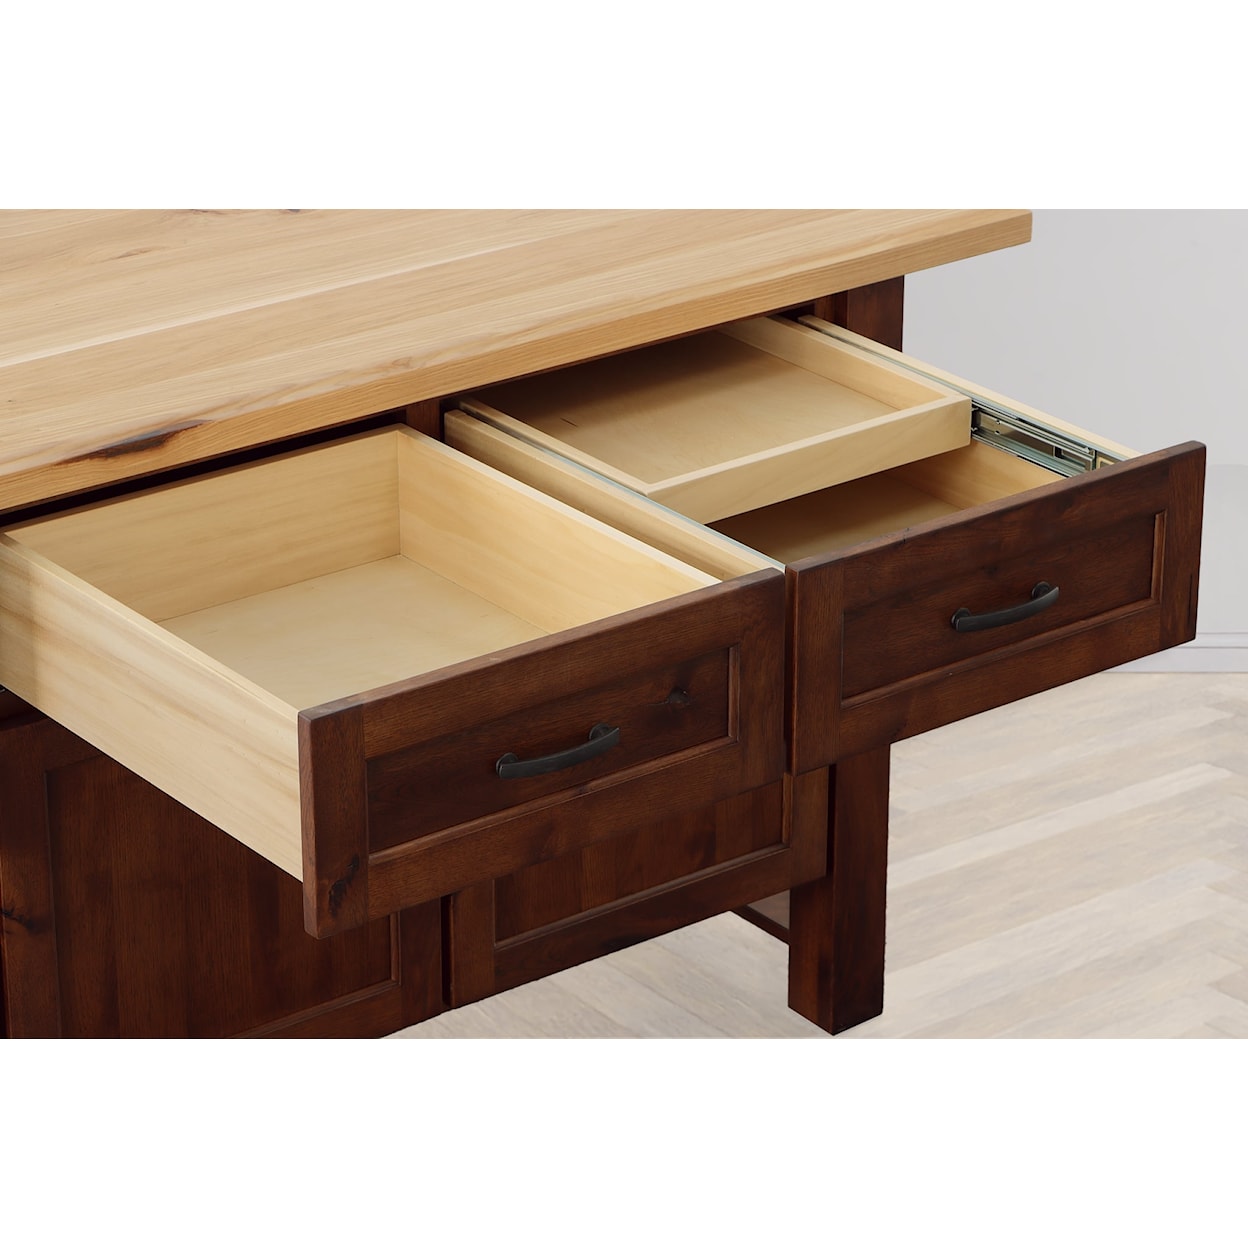 Heritage Wood Designs Laurie's Special Kitchen Island